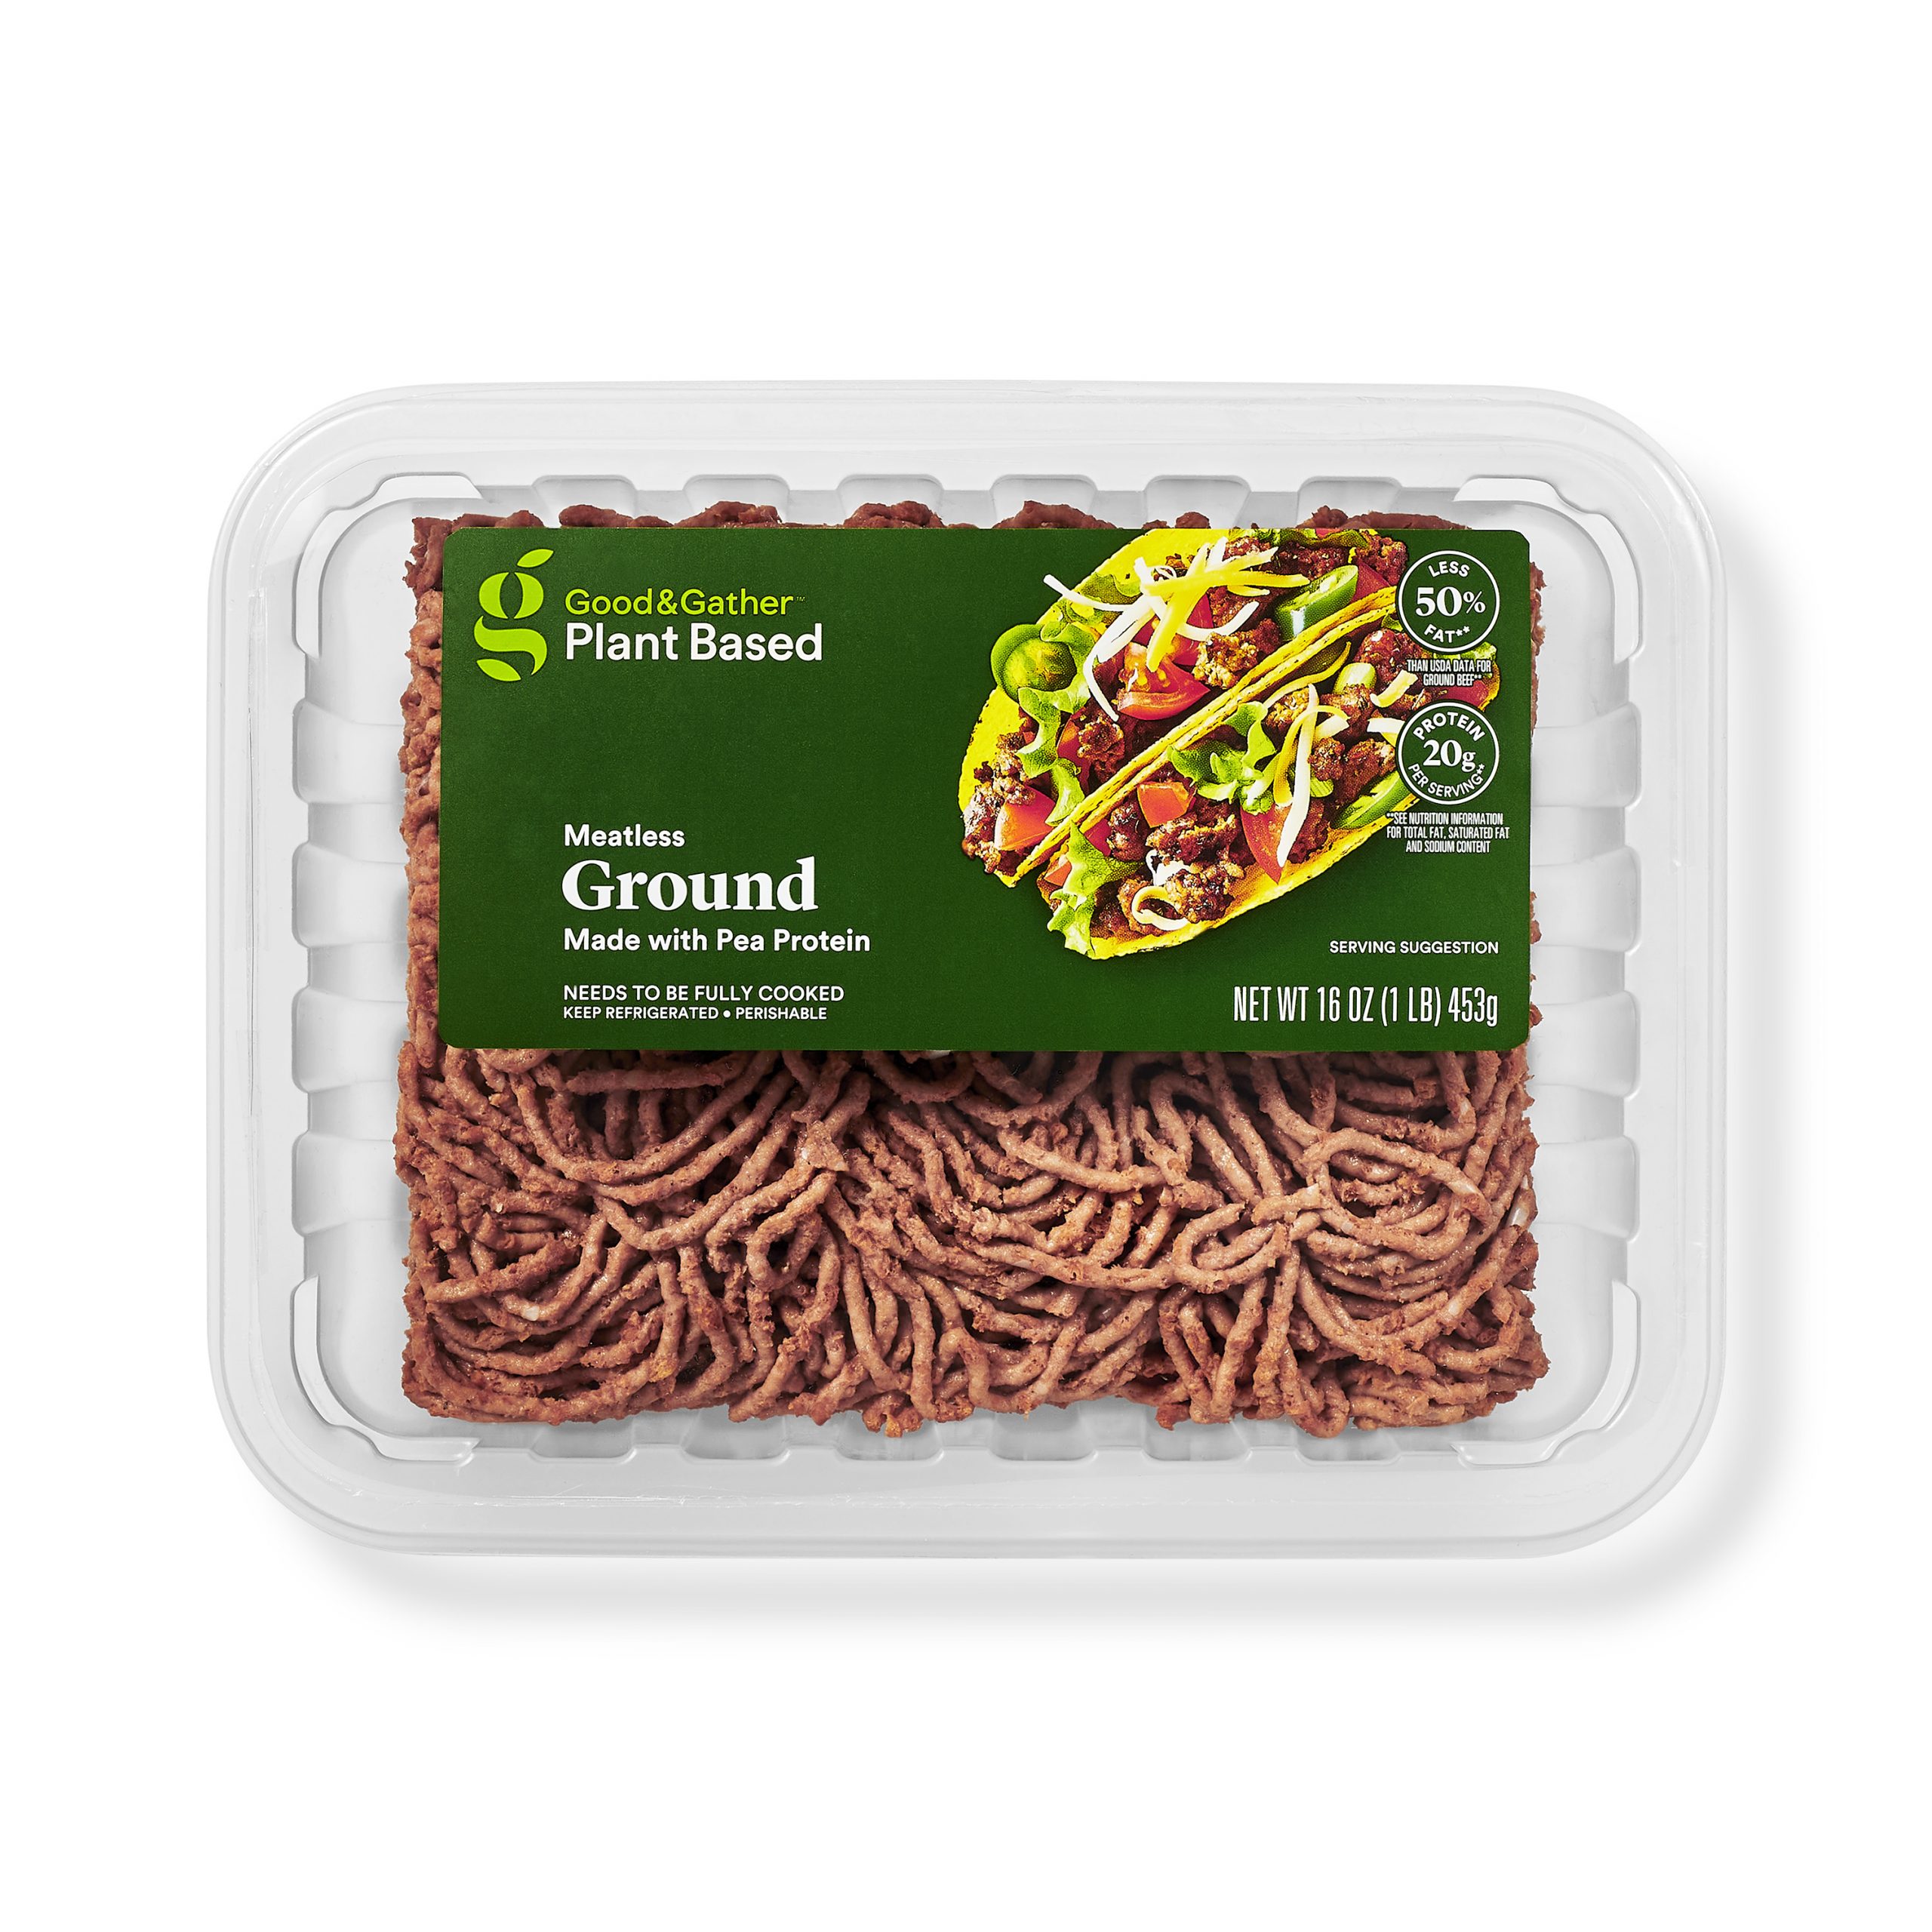 Meatless Ground